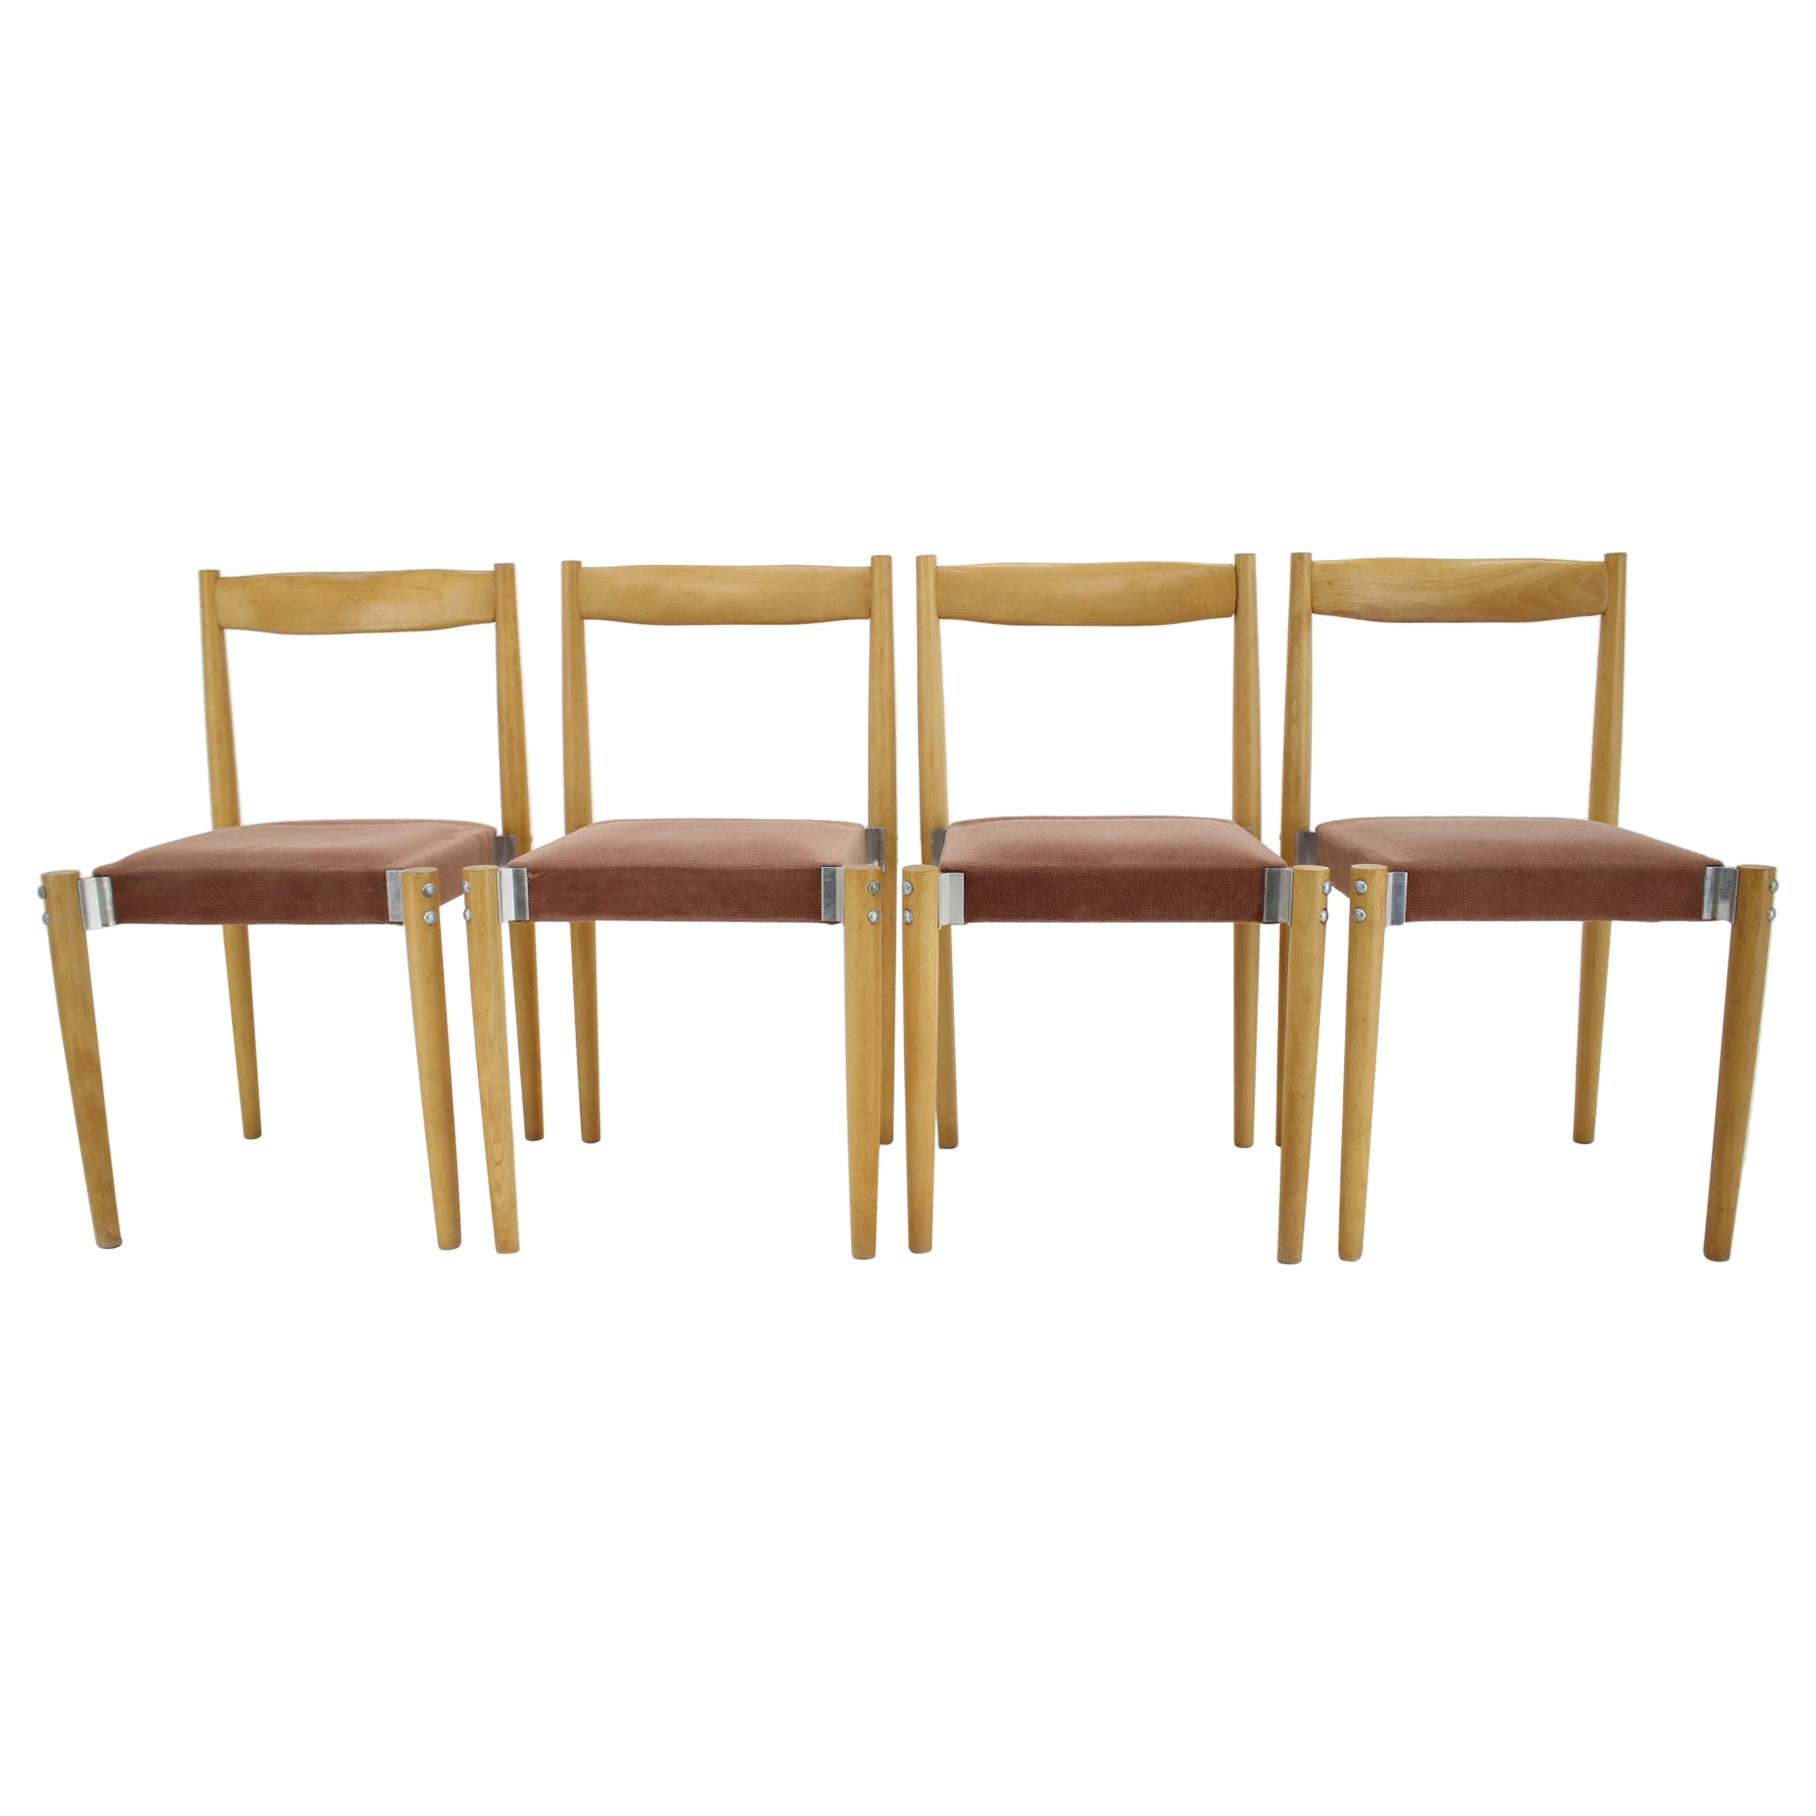 Set of Four Design Dining Chairs by Miroslav Navratil, 1970s